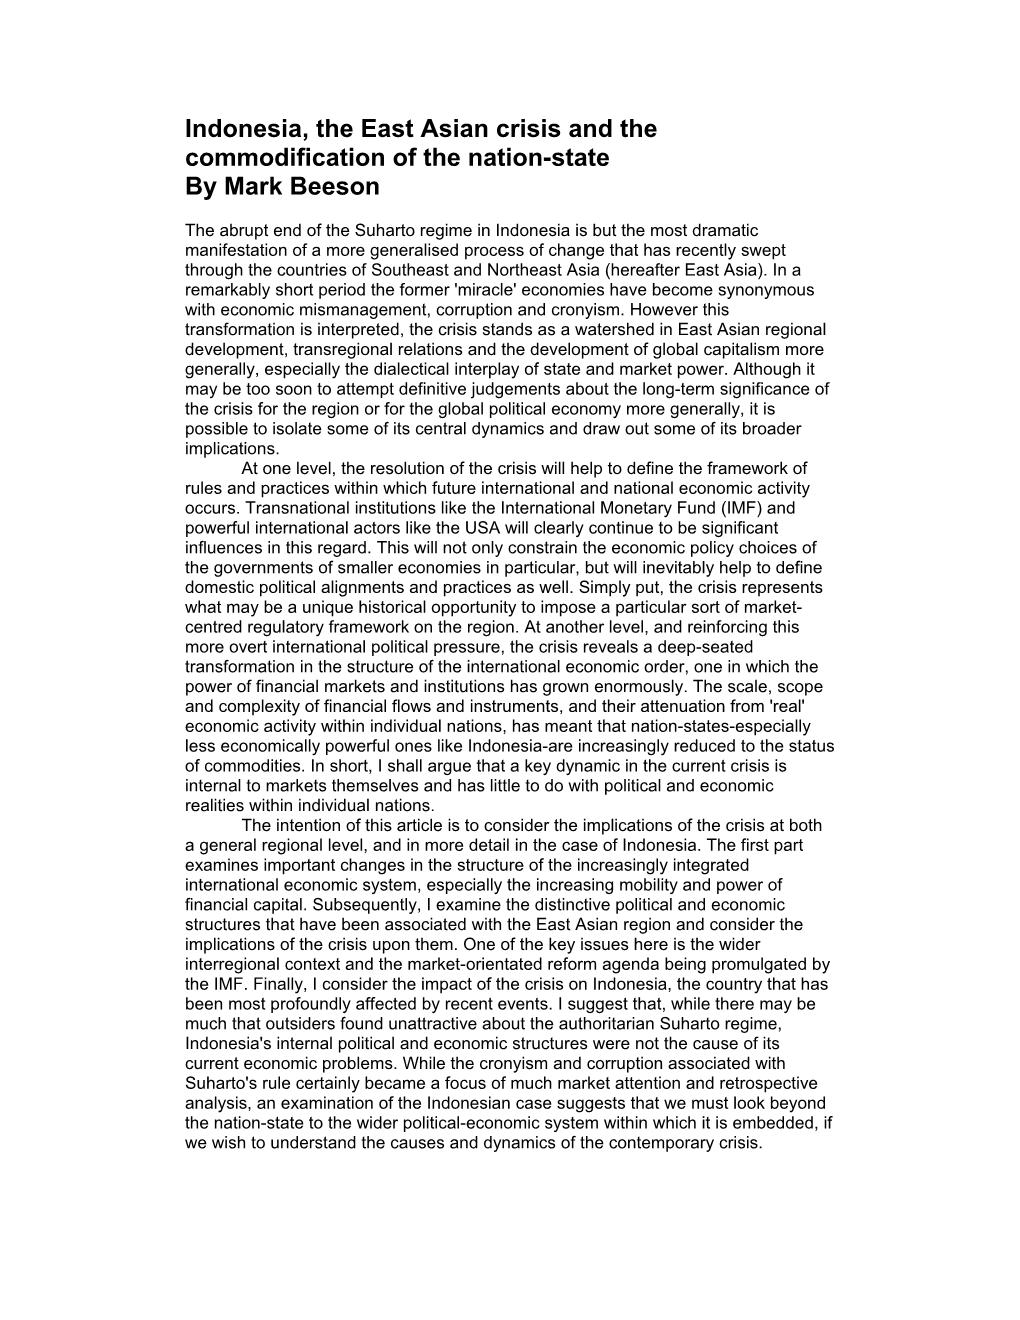 Indonesia, the East Asian Crisis and the Commodification of the Nation-State by Mark Beeson